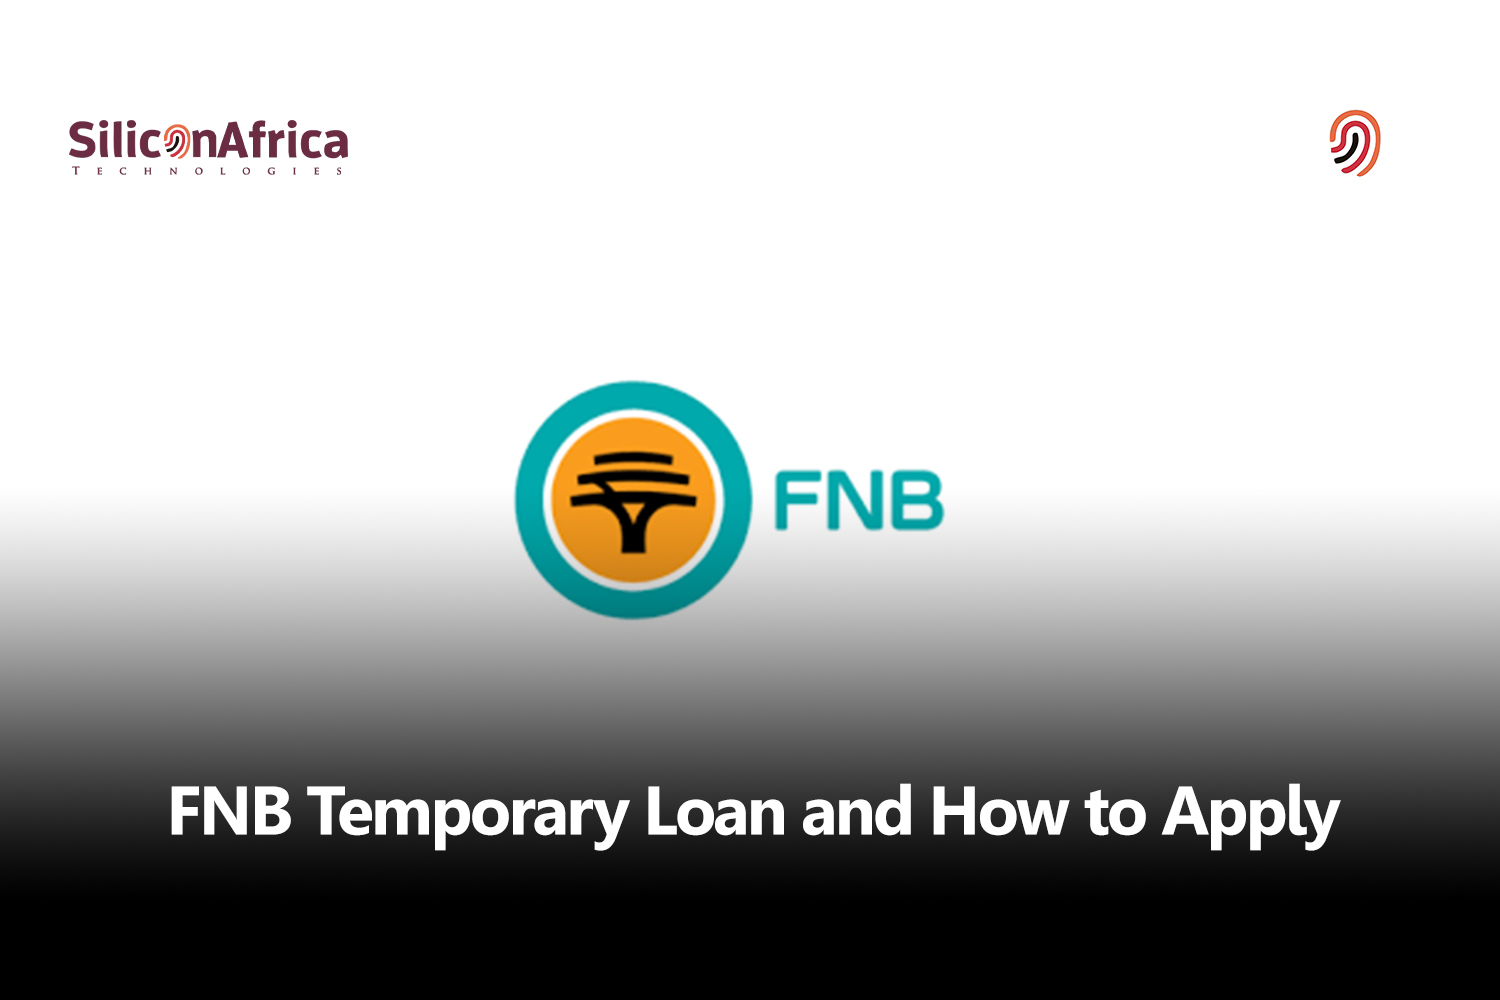 FNB Temporary Loan and How to Apply